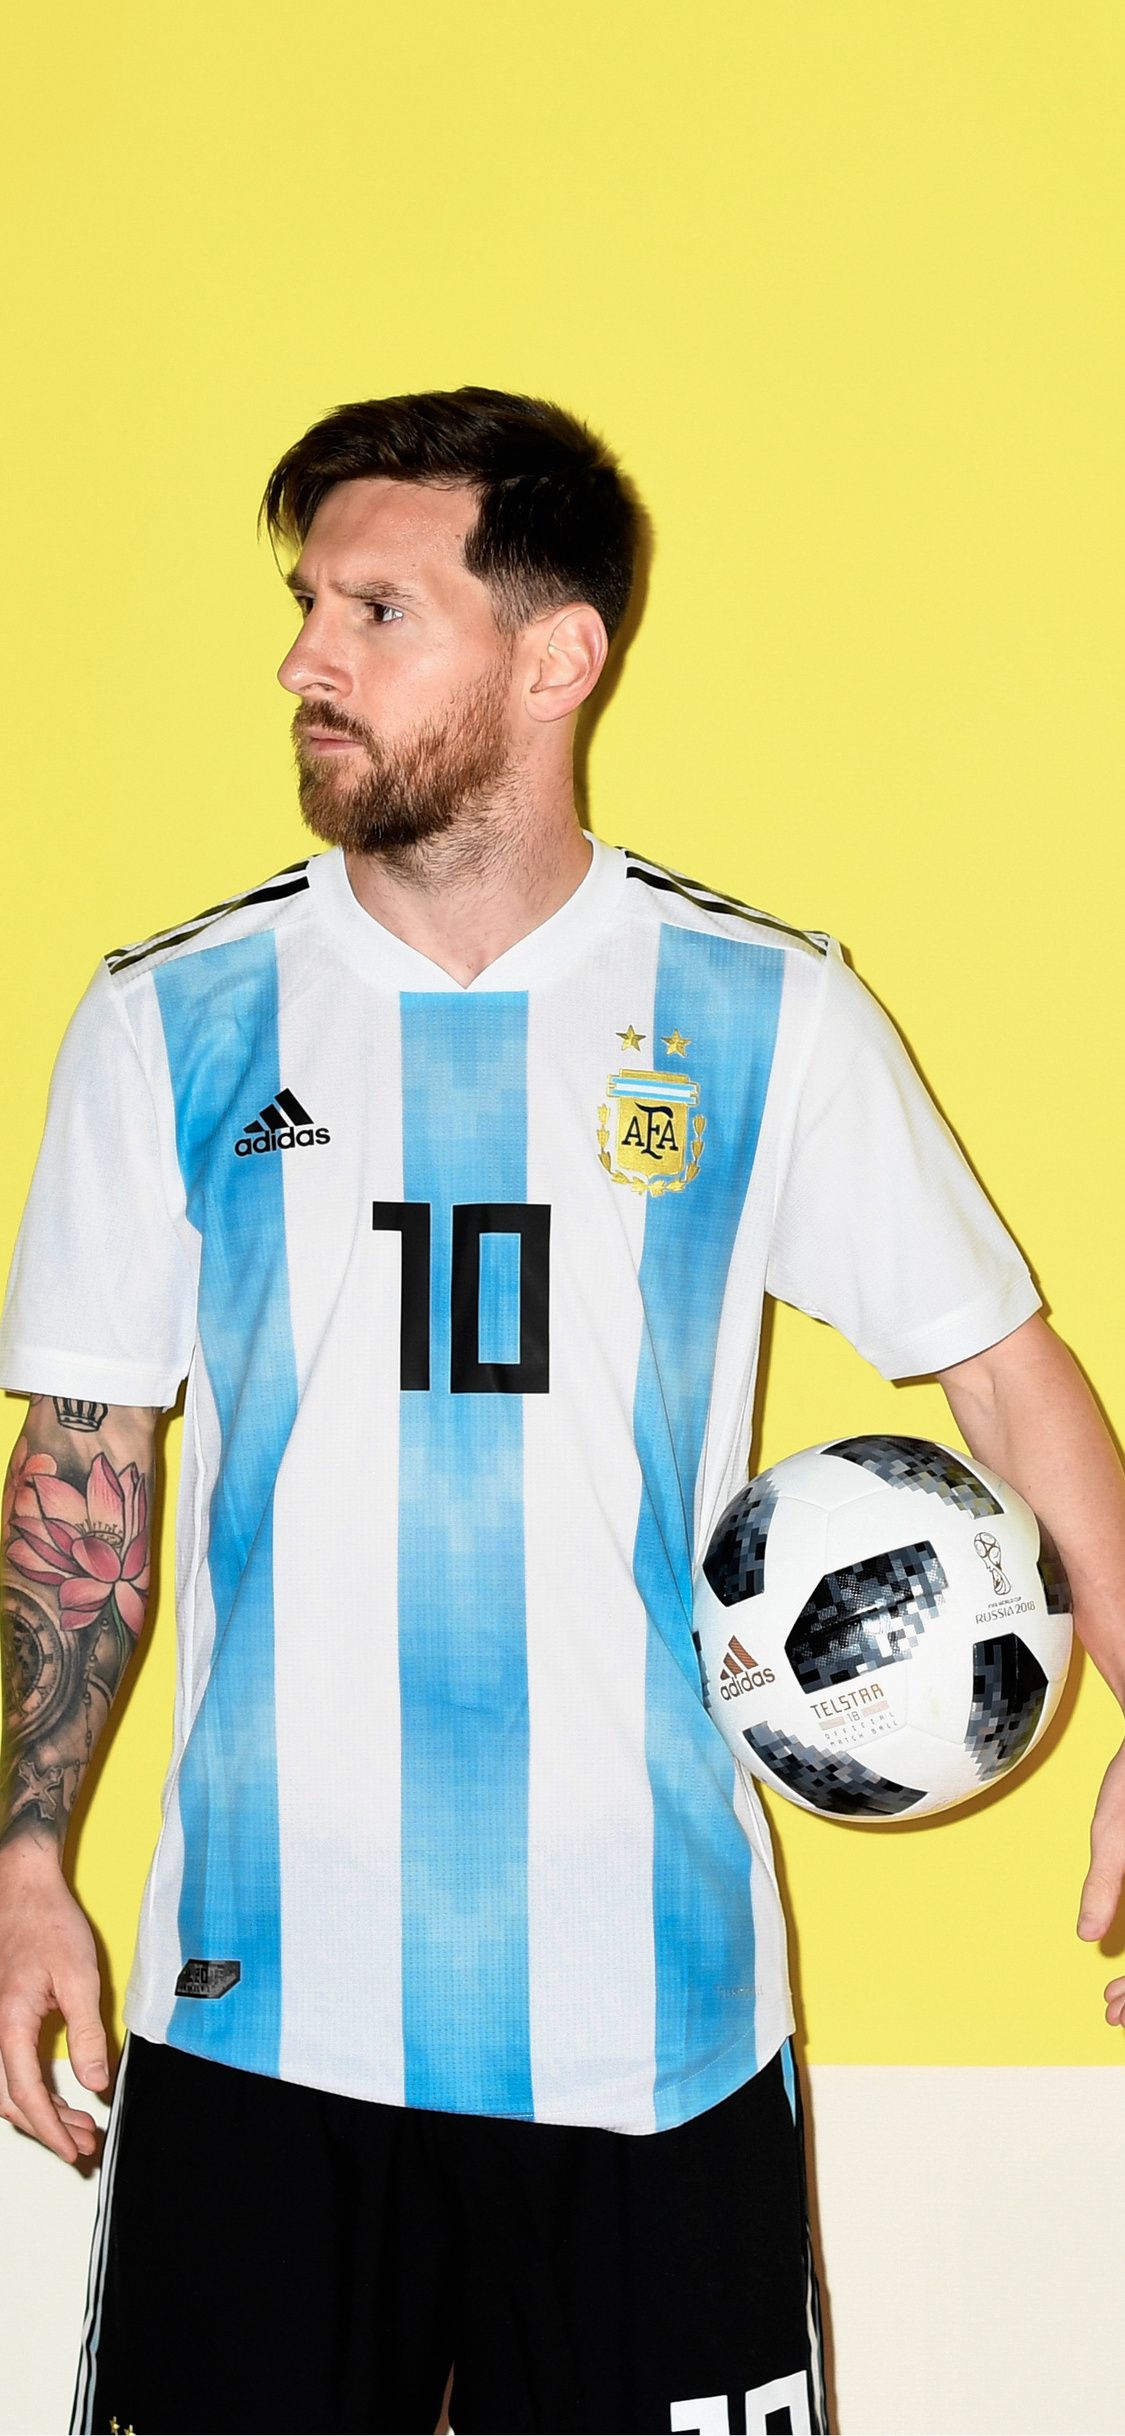 Lionel Messi Argentina Portrait 2018 iPhone XS, iPhone iPhone X HD 4k Wallpaper, Image, Background, Photo and Picture